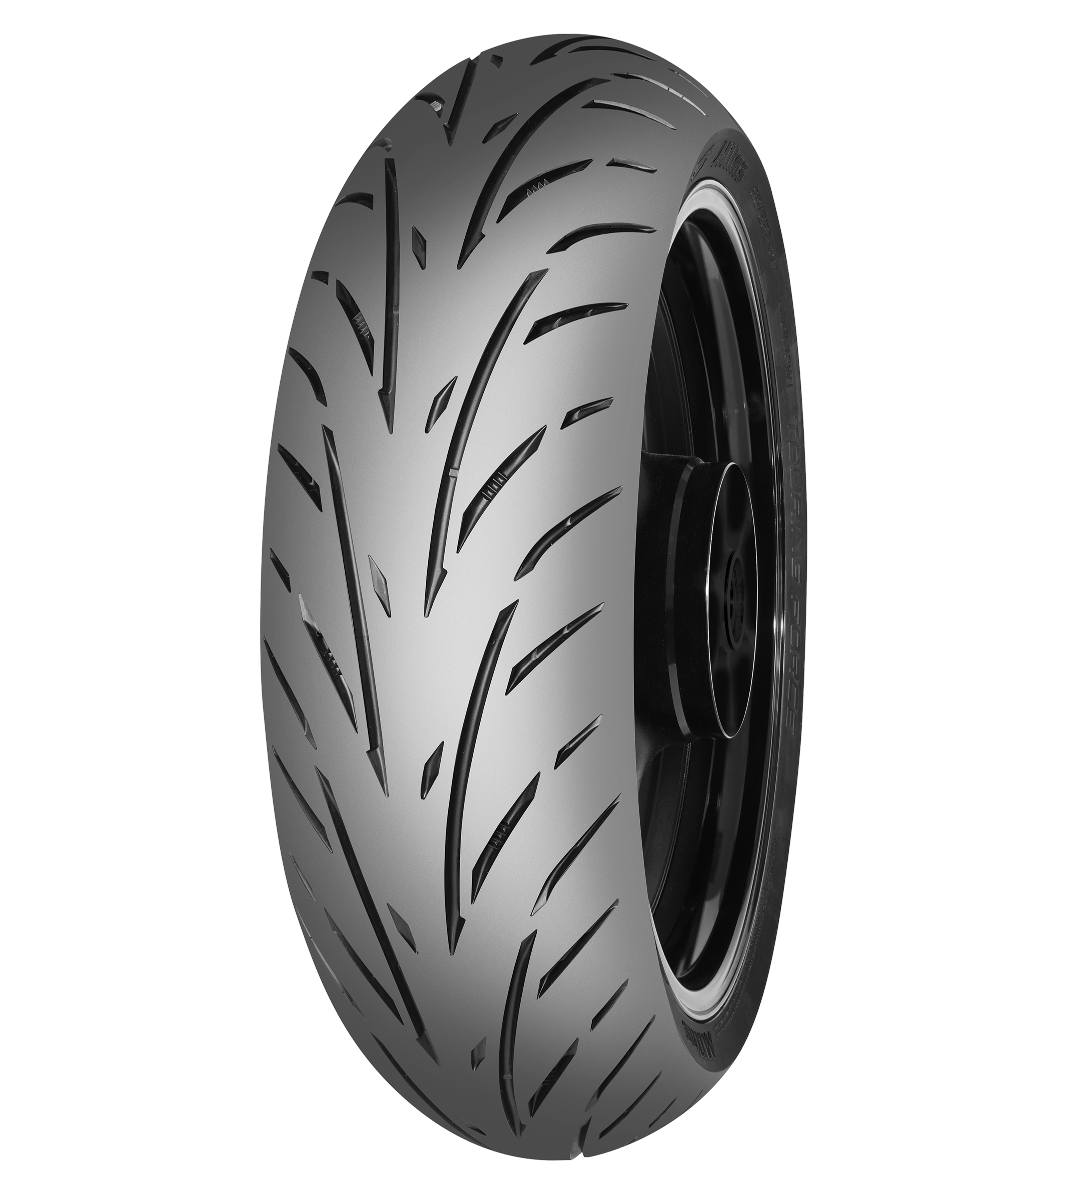 Mitas TOURING FORCE 150/70ZR17 Trail ON Trail (69W) No Stripe Tubeless Rear Tire, 608380, 150/70ZR17, Rear, Touring-Force, Trail, Trail ON, Tires - Imported and distributed in North & South America by Lindeco Genuine Powersports - Premier Powersports Equipment and Accessories for Motorcycle Enthusiasts, Professional Riders and Dealers.